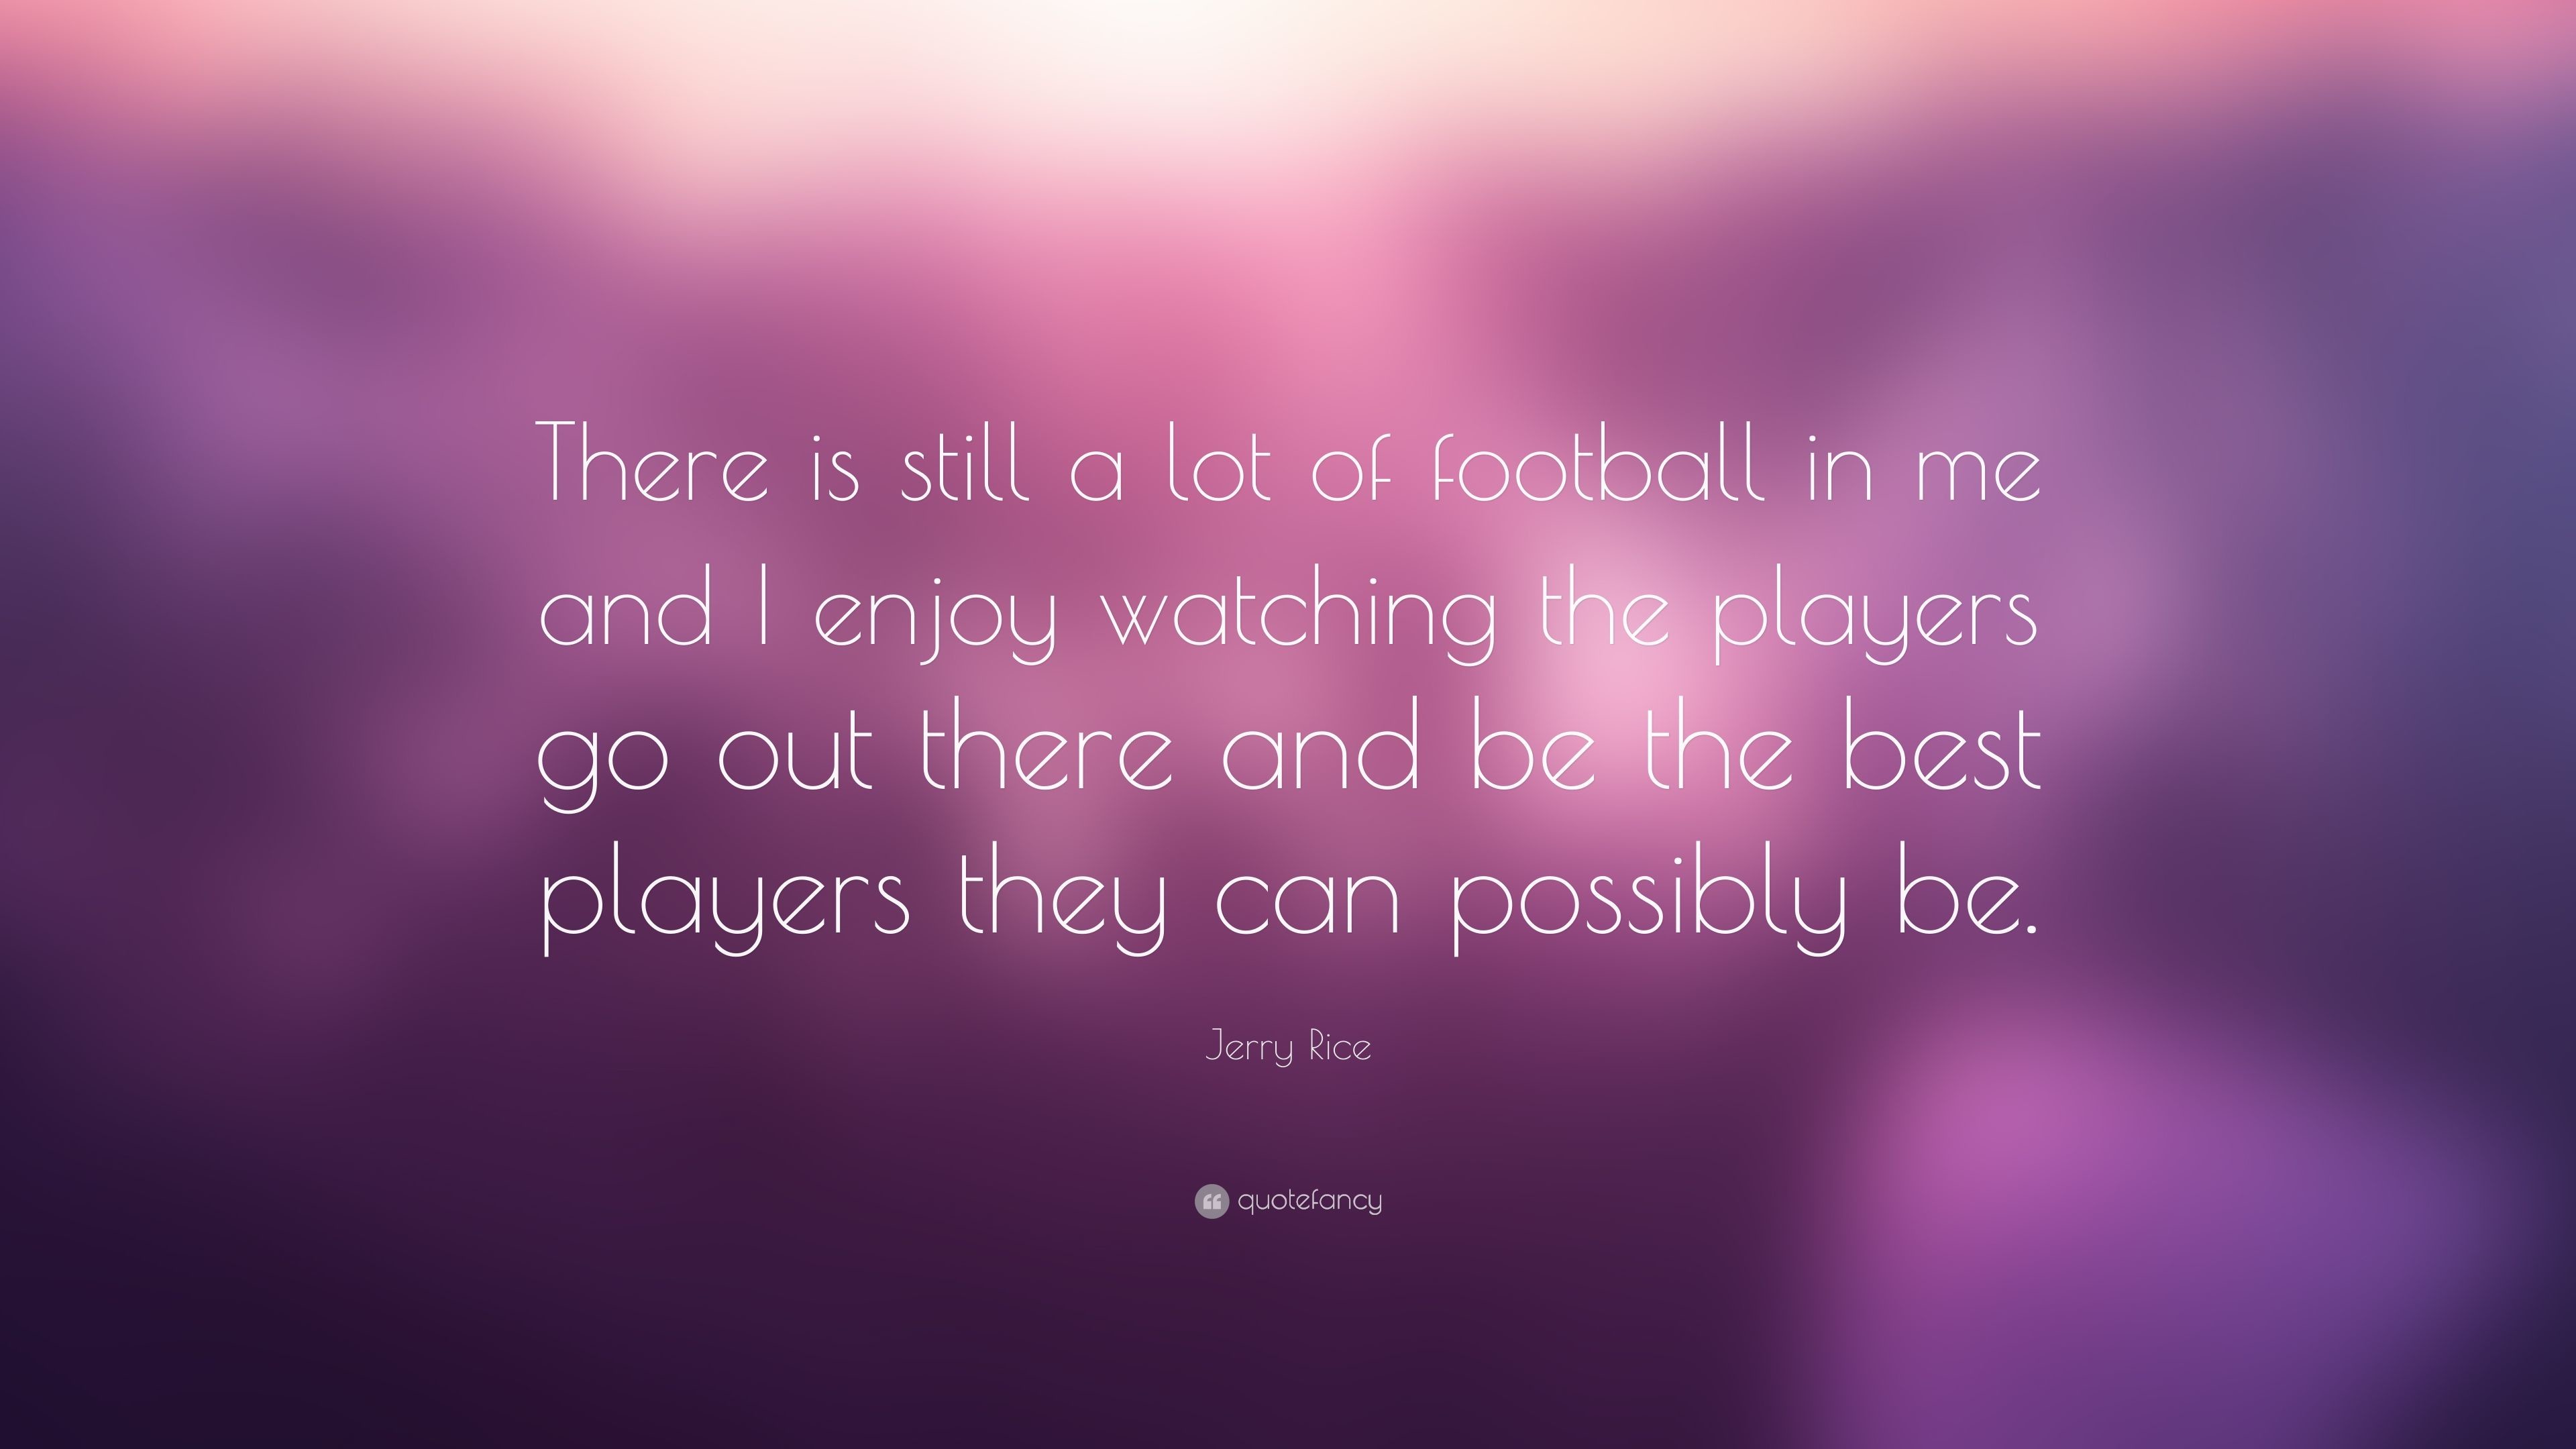 3840x2160 Jerry Rice Quote: “There is still a lot of football in me and I